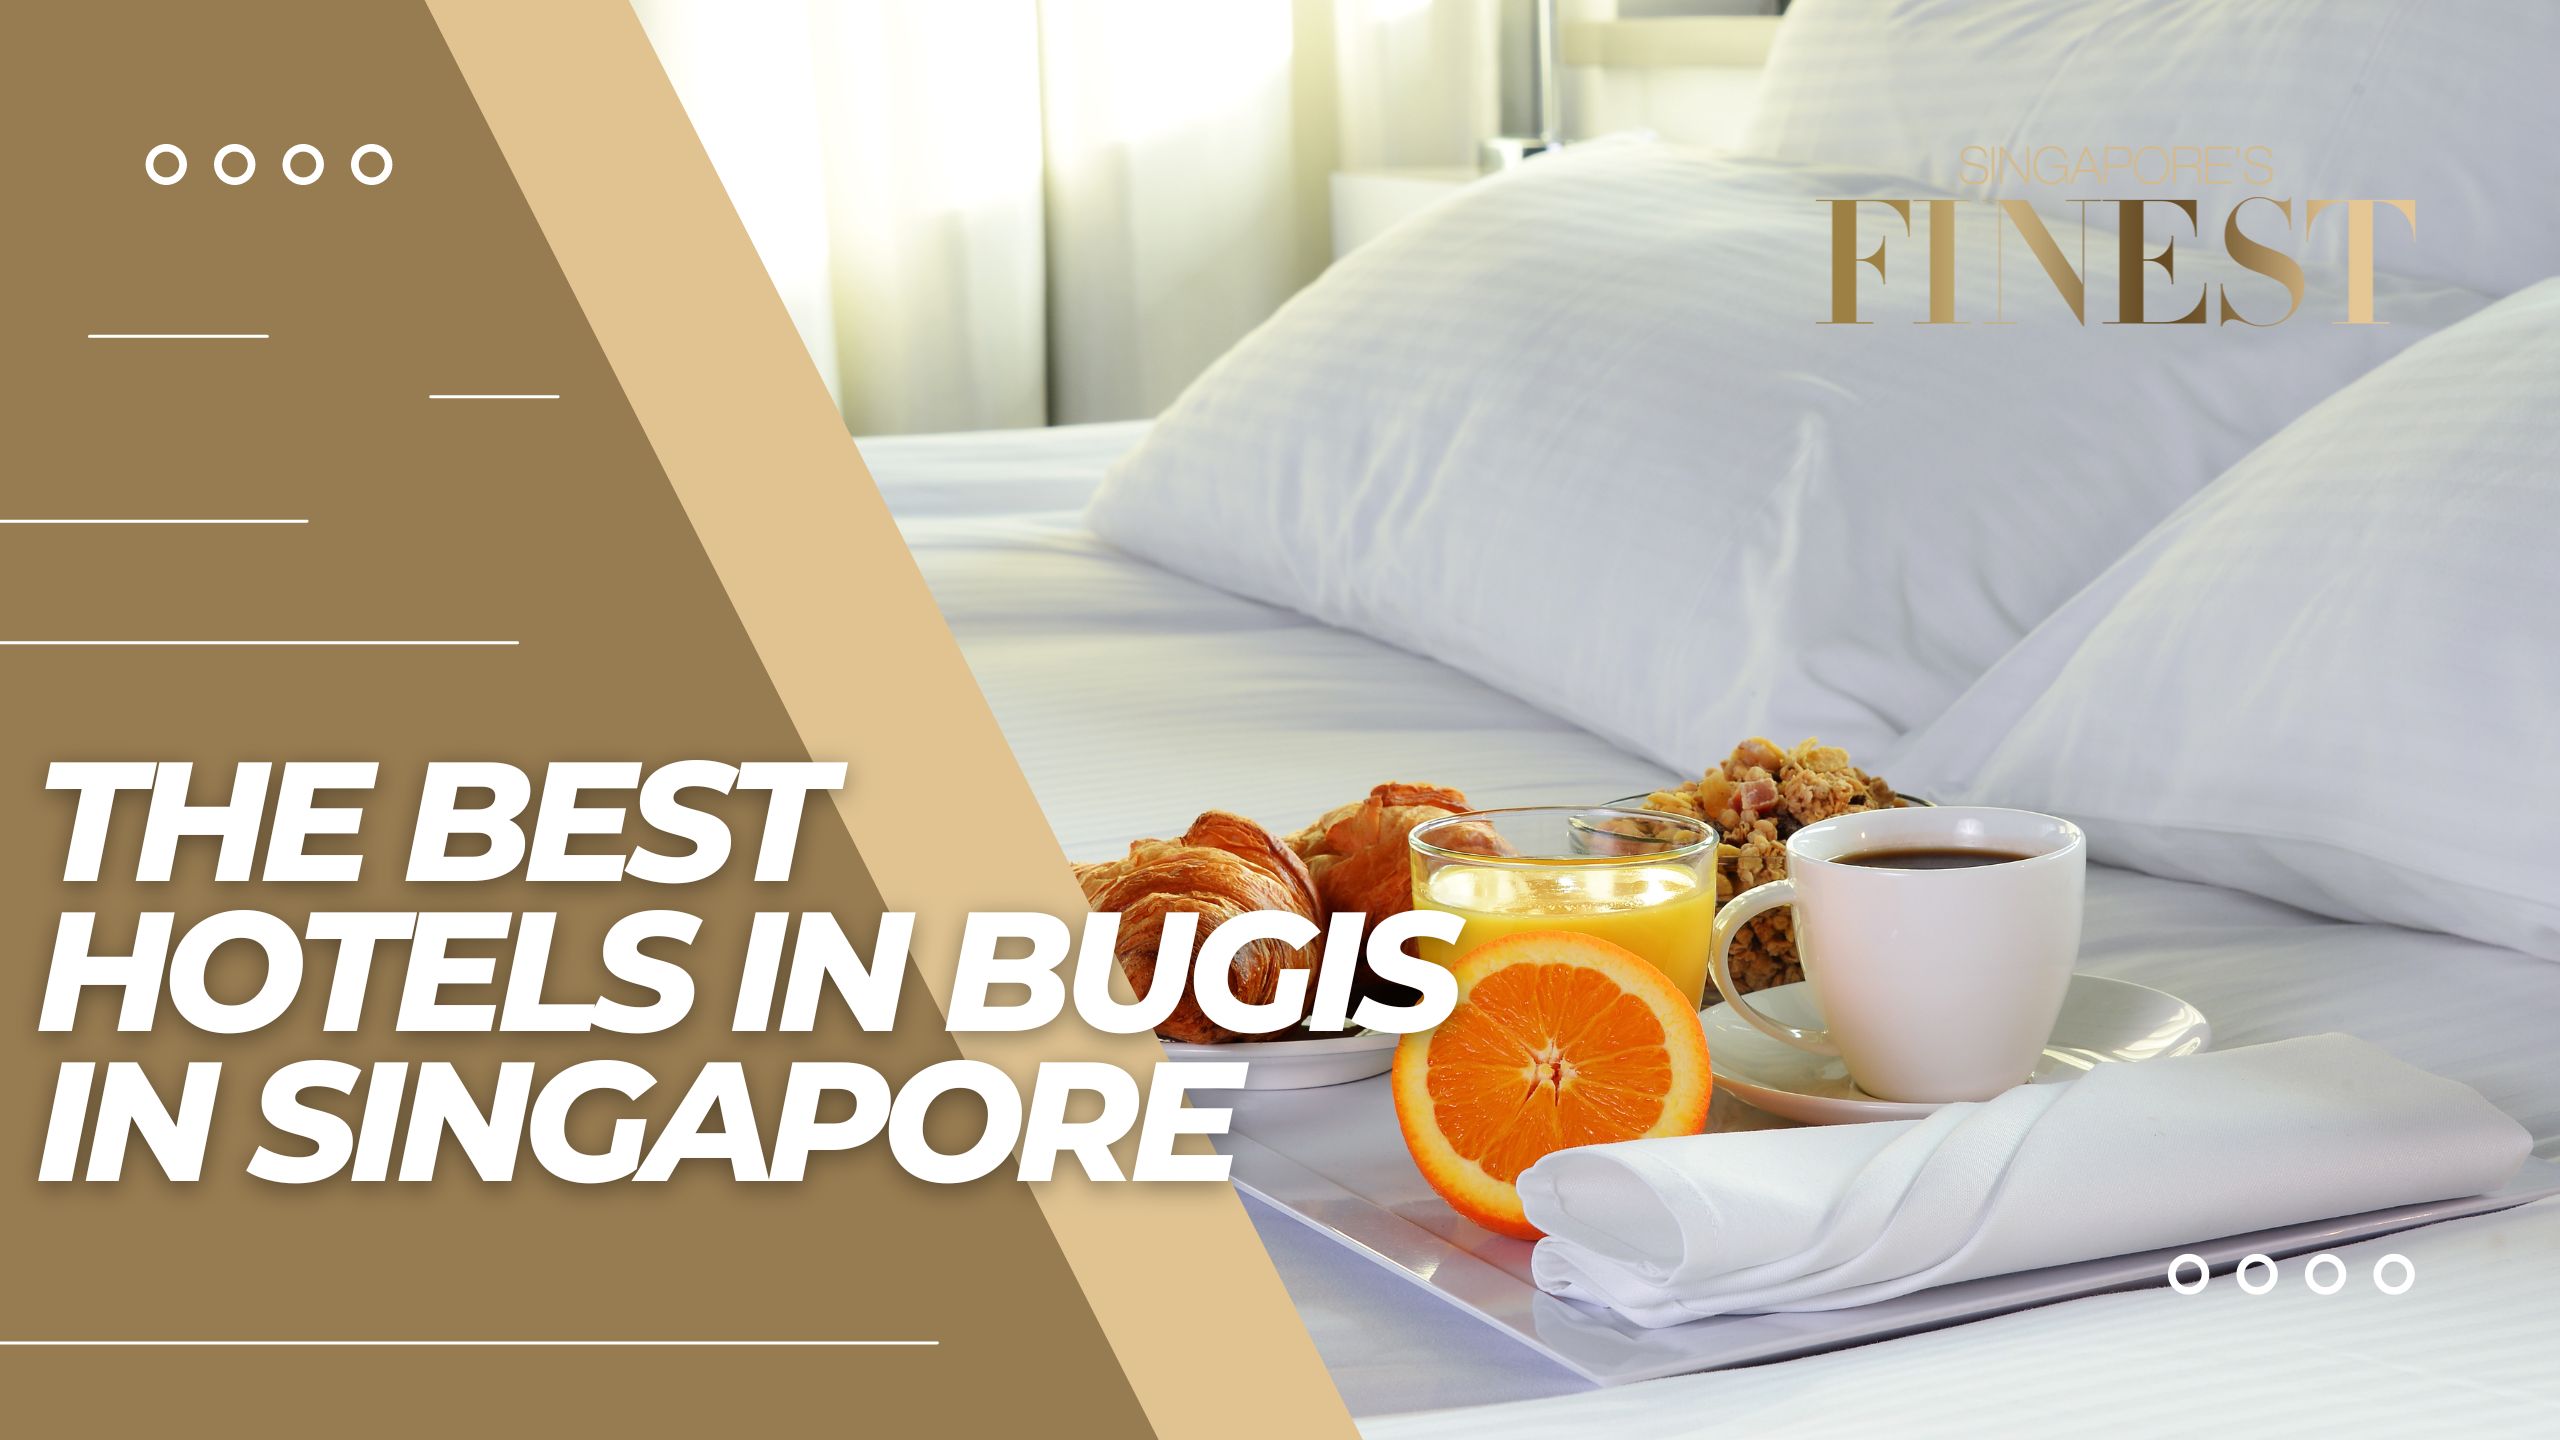 The Finest Hotels in Bugis in Singapore